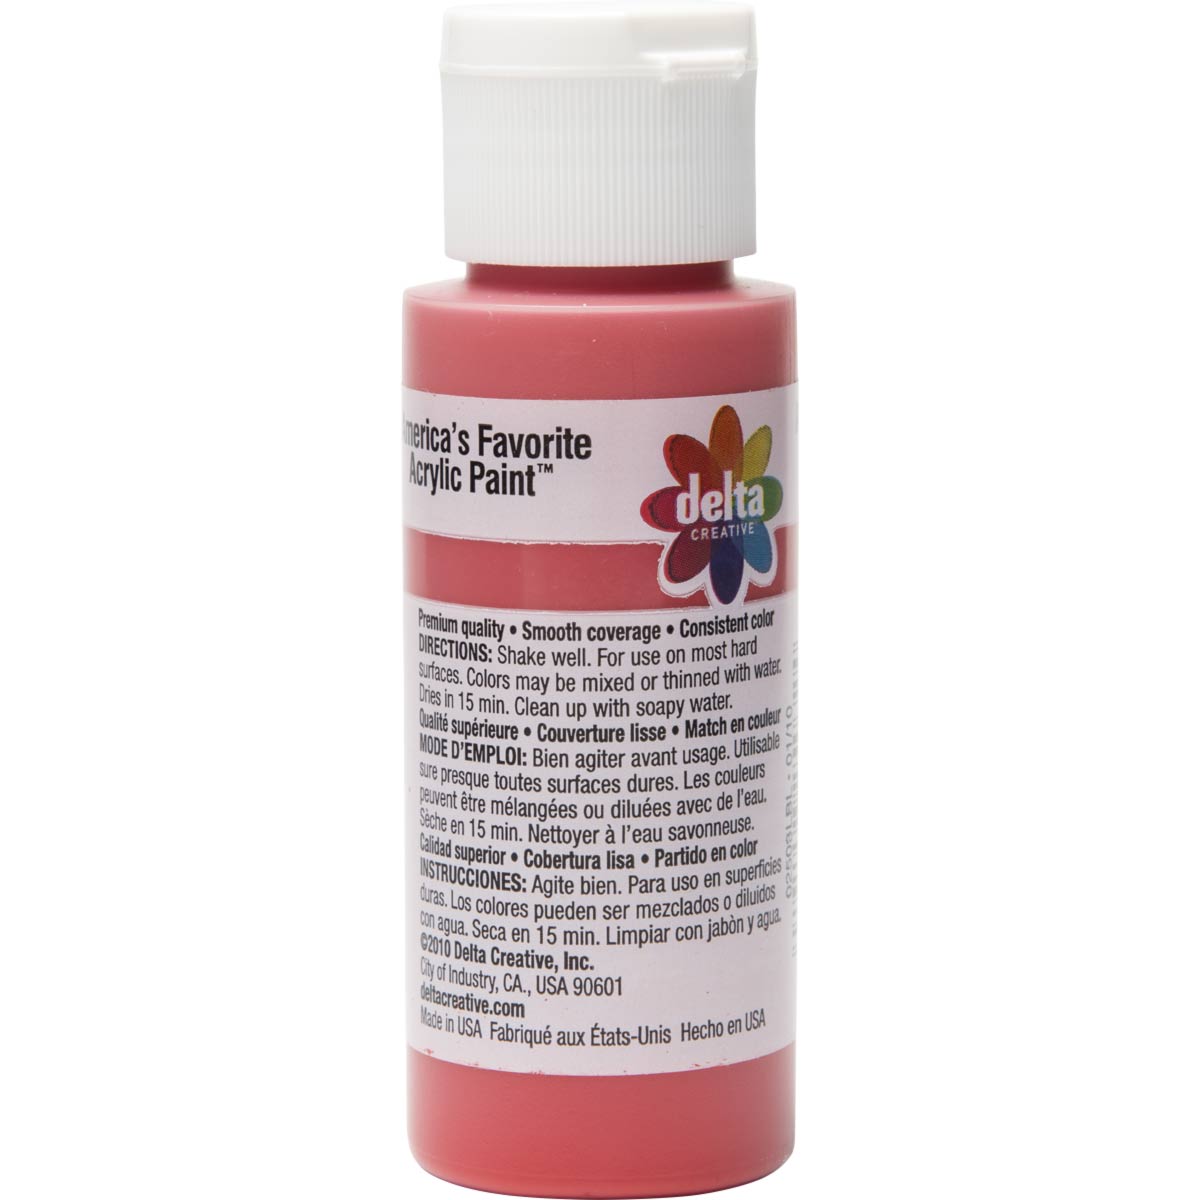 Delta Ceramcoat Acrylic Paint - Bright Red, 2 oz. - 025030202W